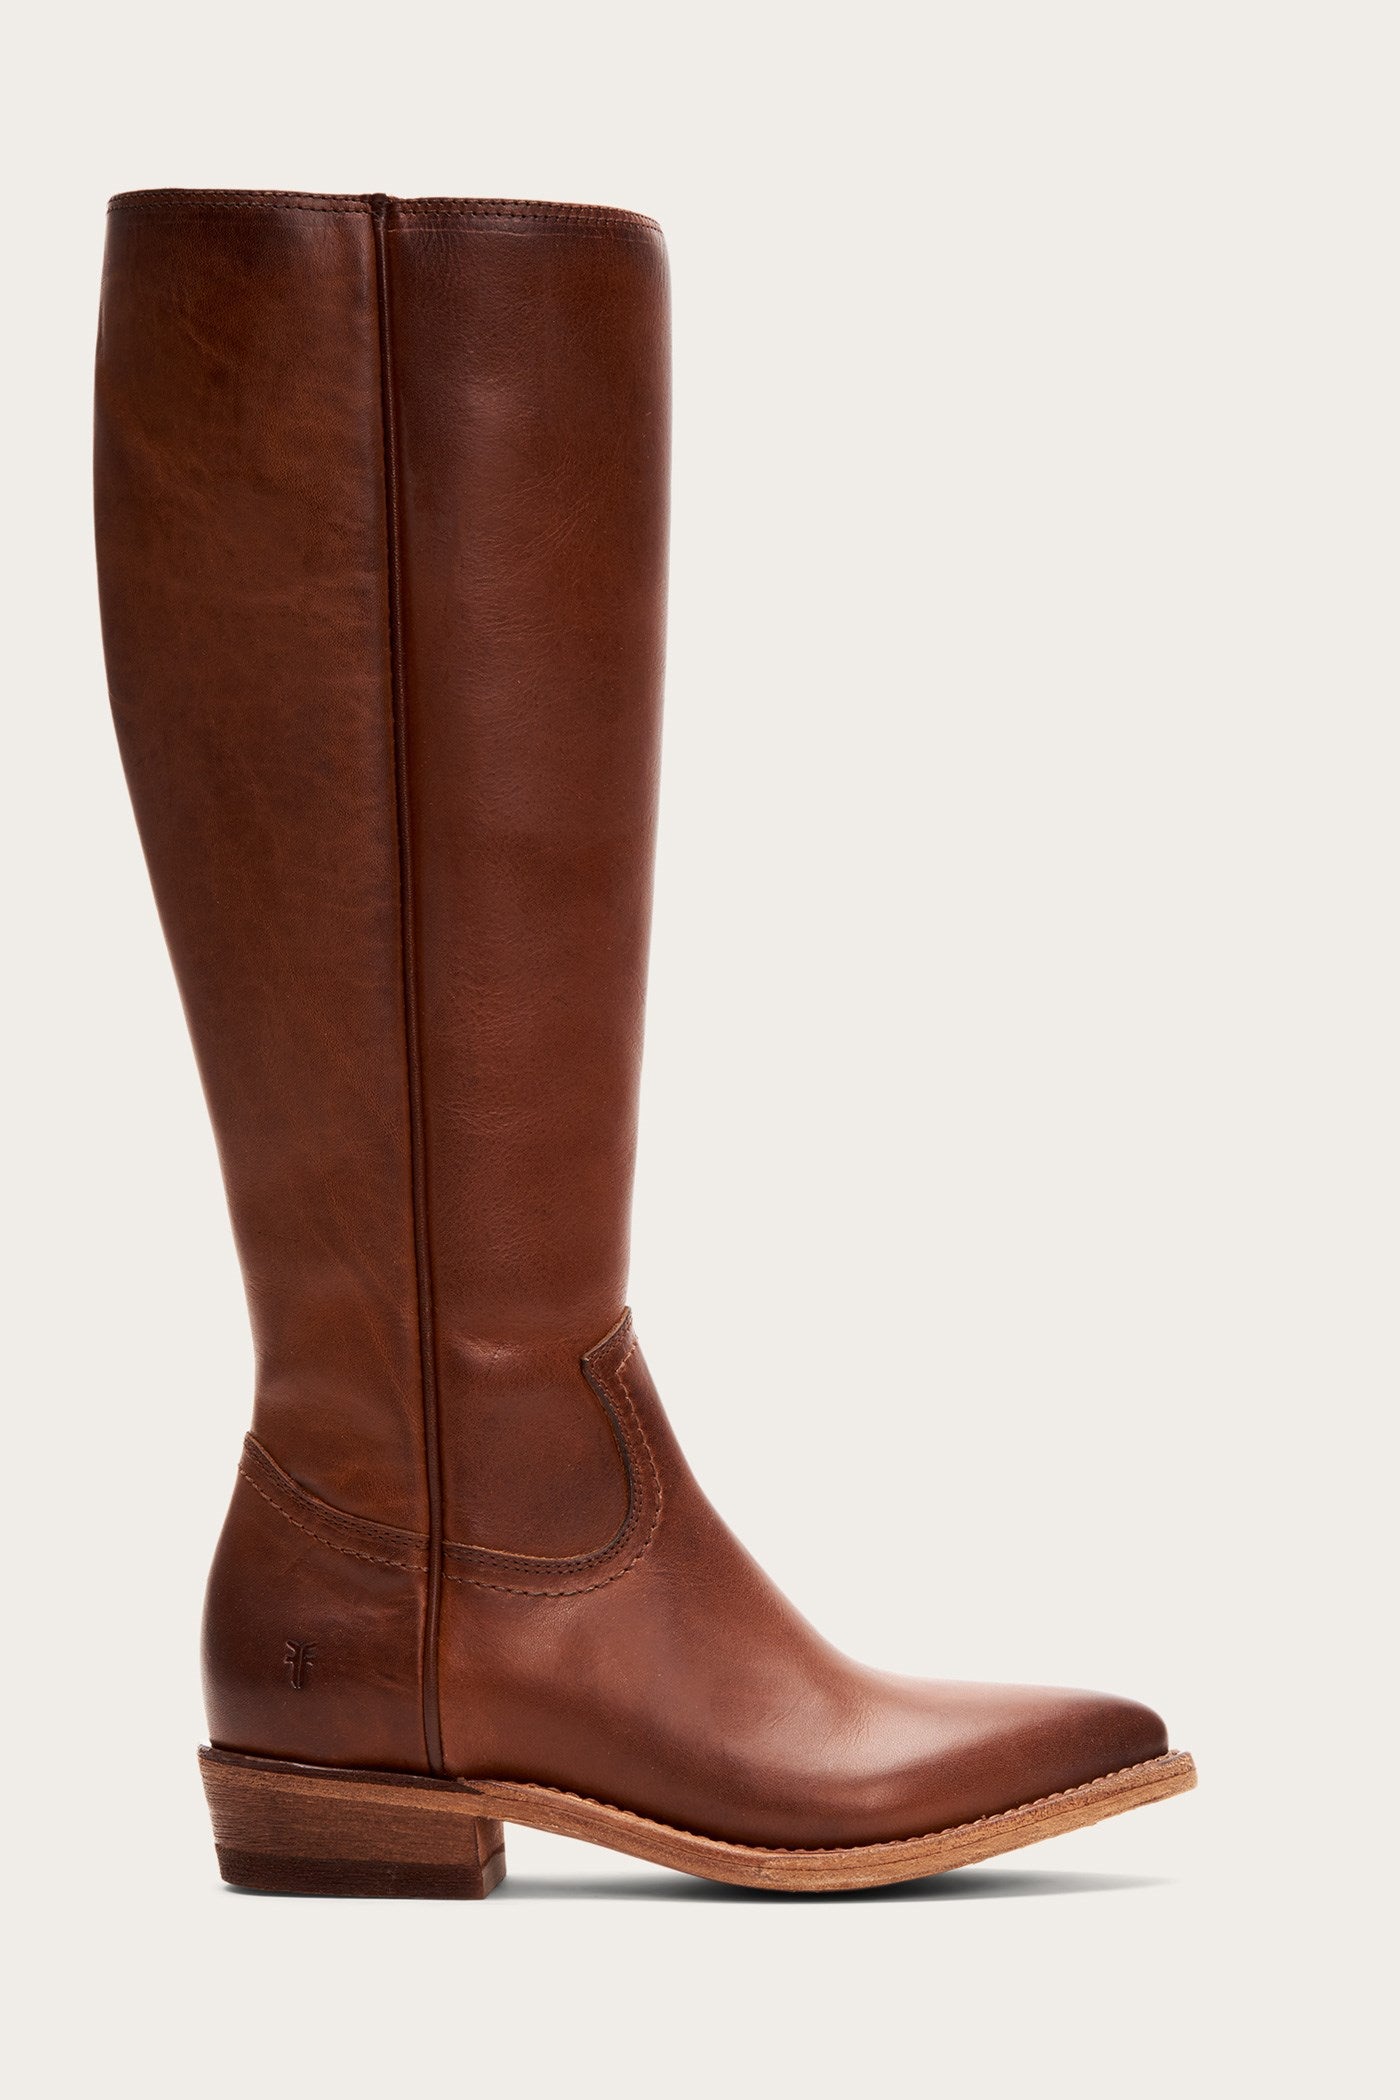 frye tall boots with zipper